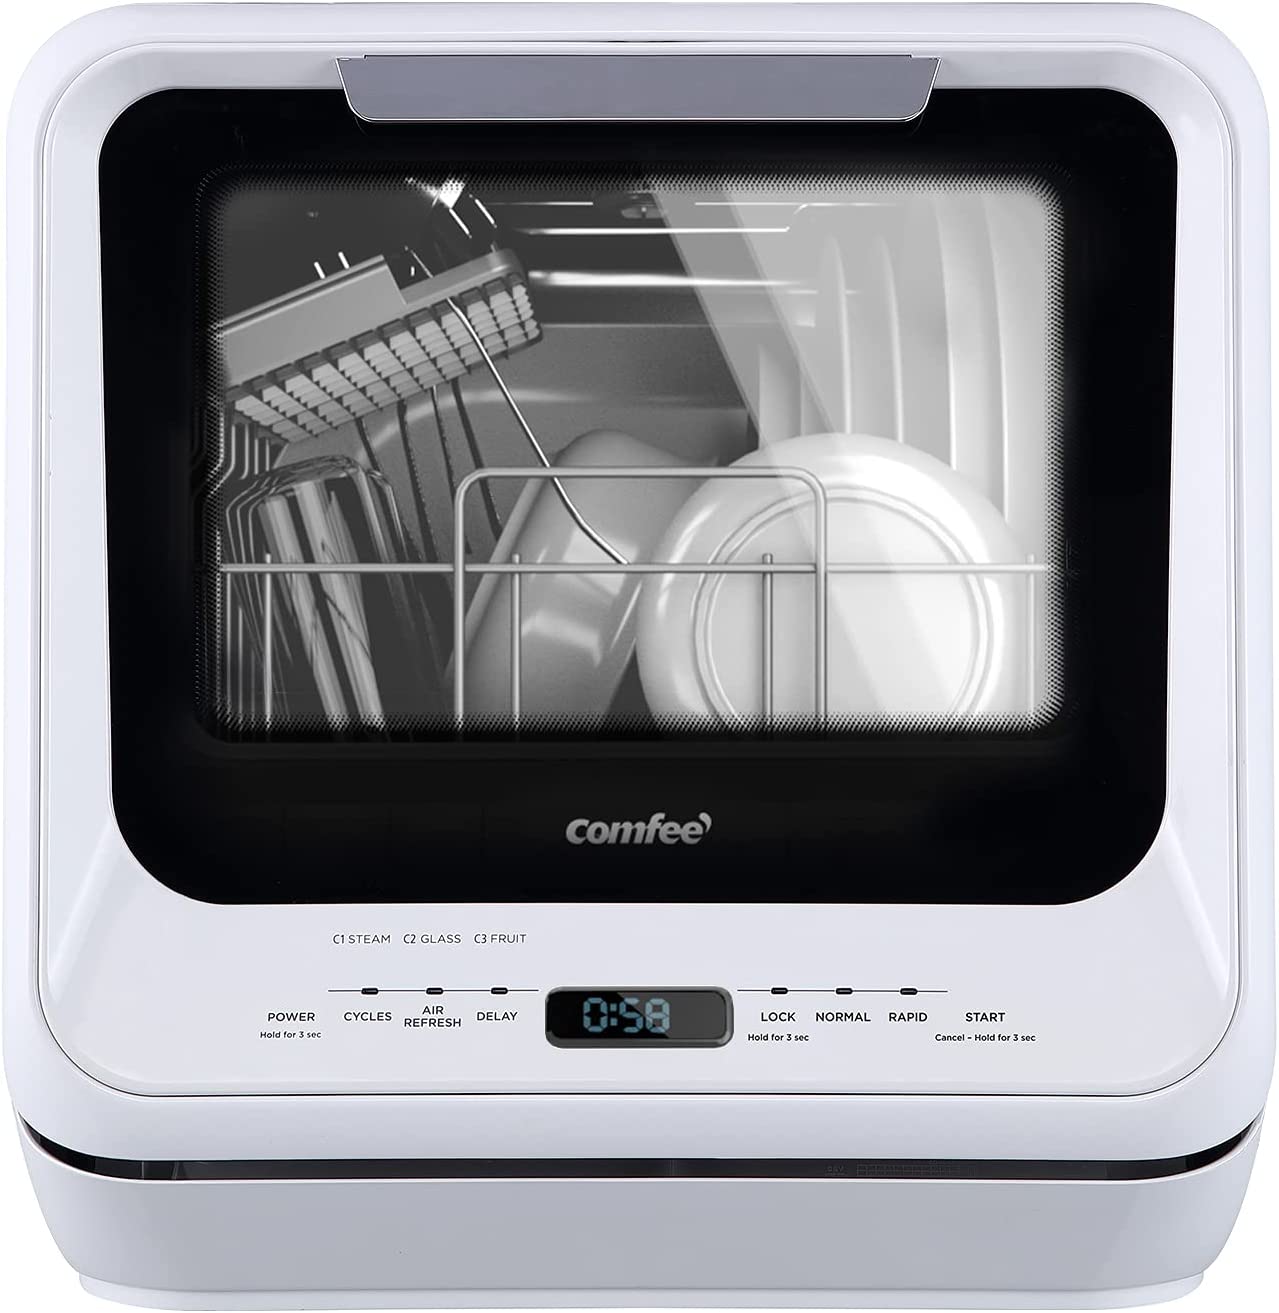 COMFEE' Countertop Dishwasher, Portable Dishwasher with 5L Built-in Water Tank, No Hookup Needed, 6 Programs, 360° Dual Spray, 192℉ Steam& Air-Dry